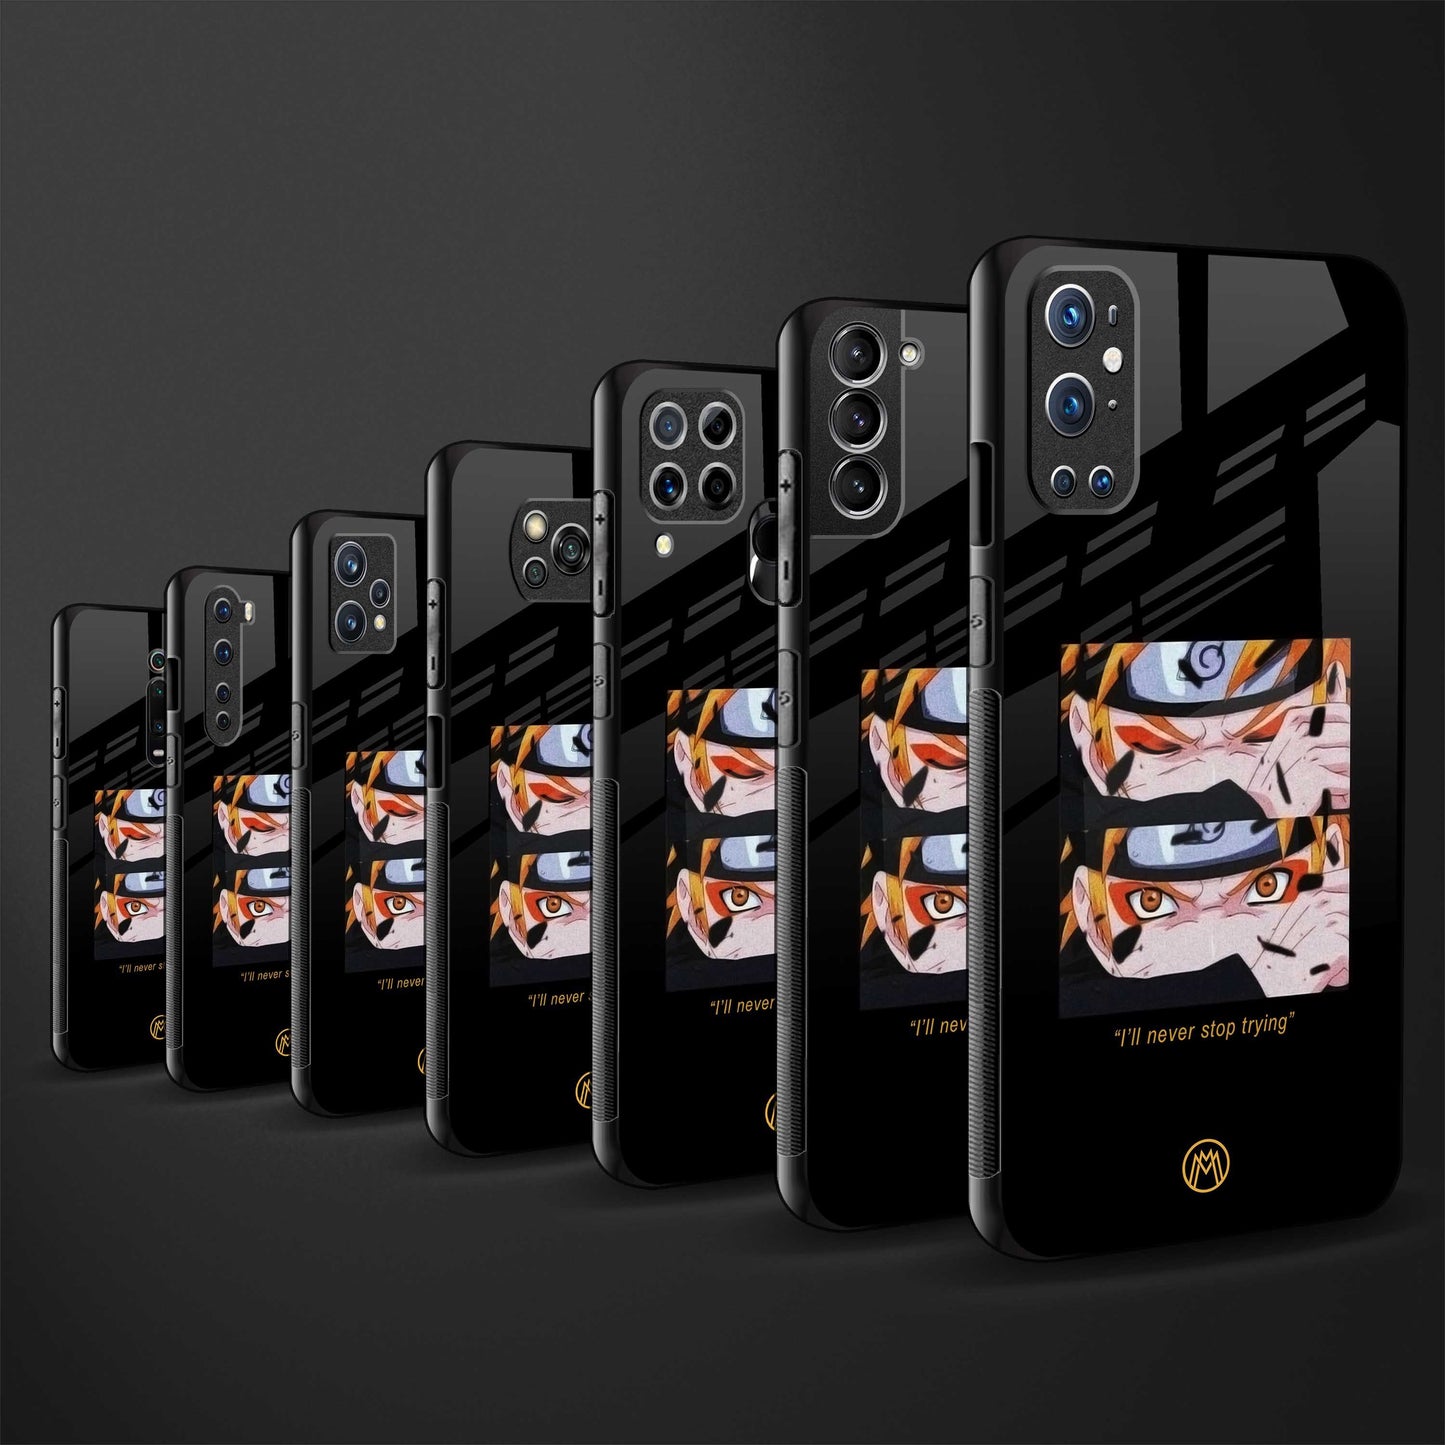 naruto motivation anime back phone cover | glass case for samsung galaxy a13 4g